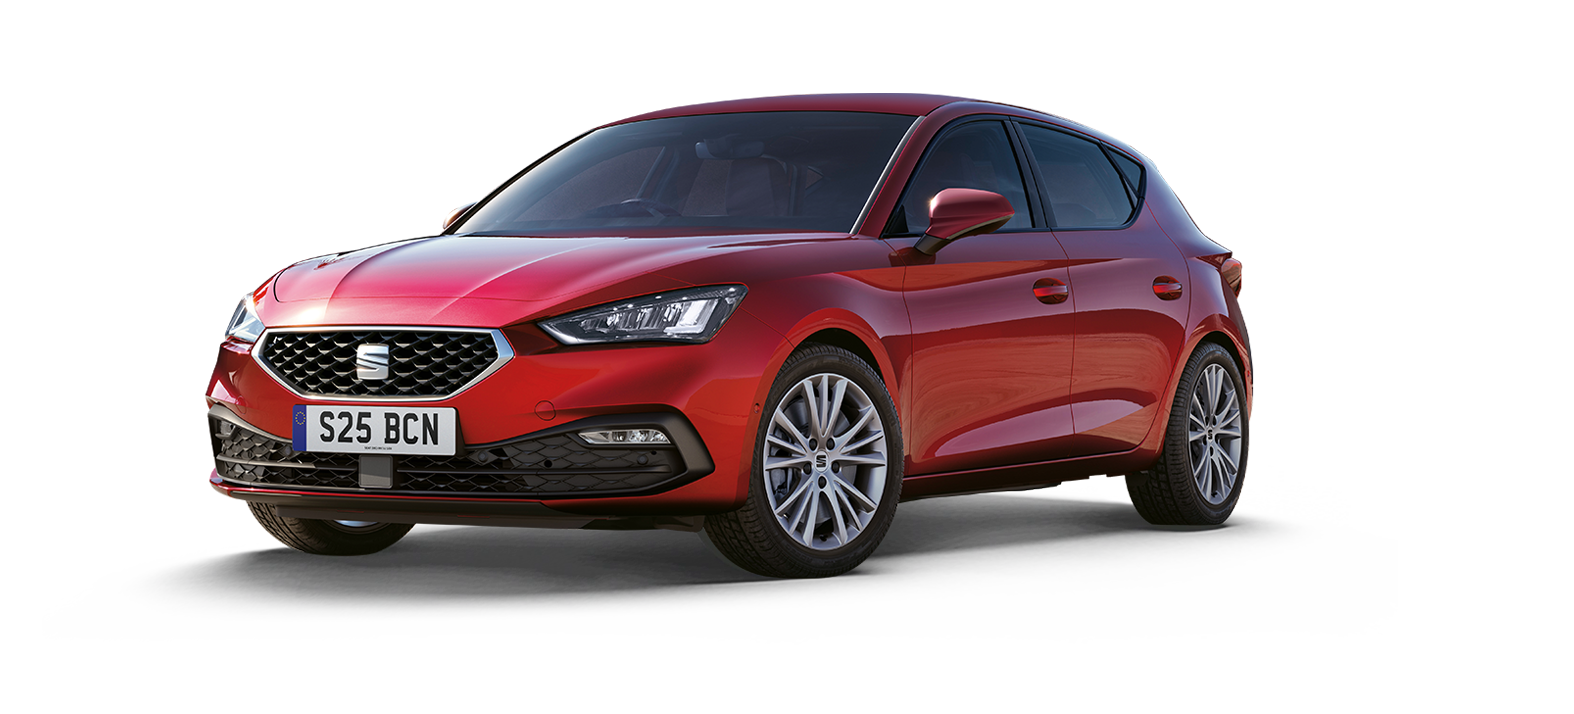 Technical information for the SEAT Leon SE Dynamic